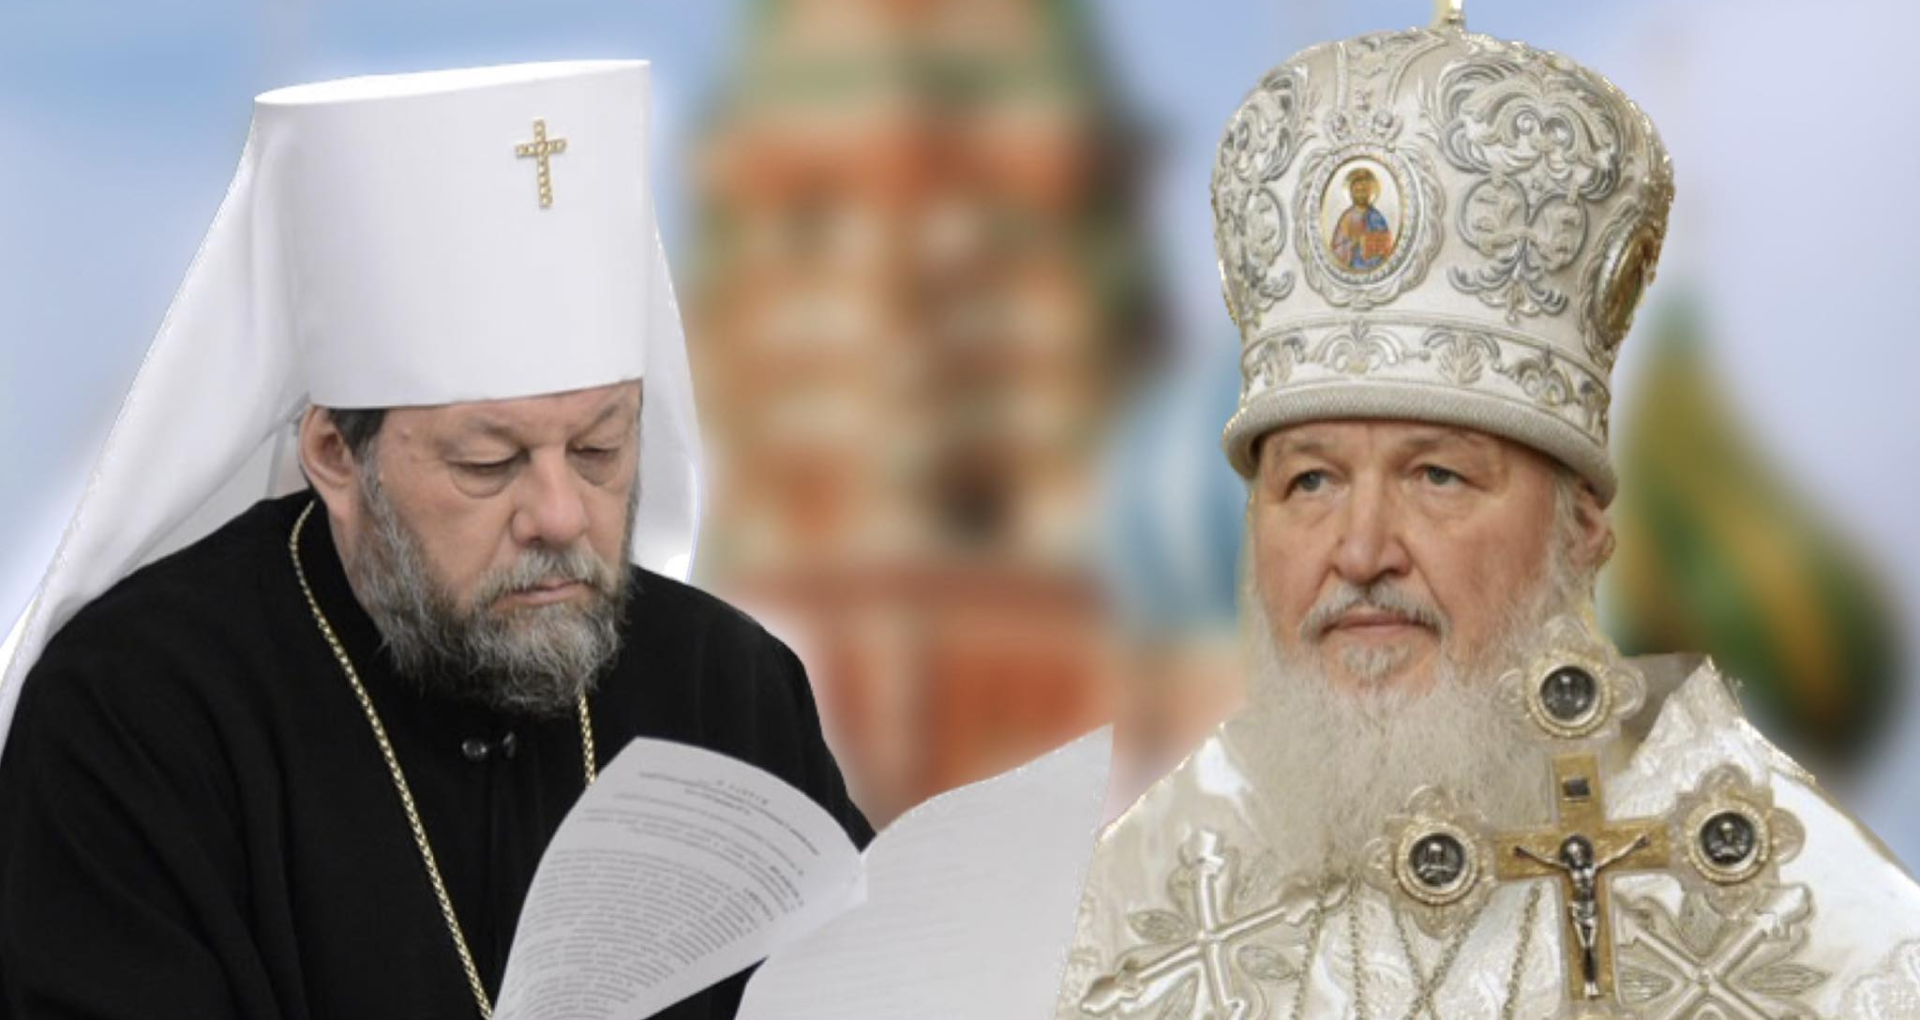 Behind-the-scenes revelations from the Orthodox Church. The Metropolitanate of Moldova confirms the authenticity of the letter addressed to Patriarch Kiril of Moscow by His Eminence Vladimir: “We are in a situation of institutional bankruptcy”